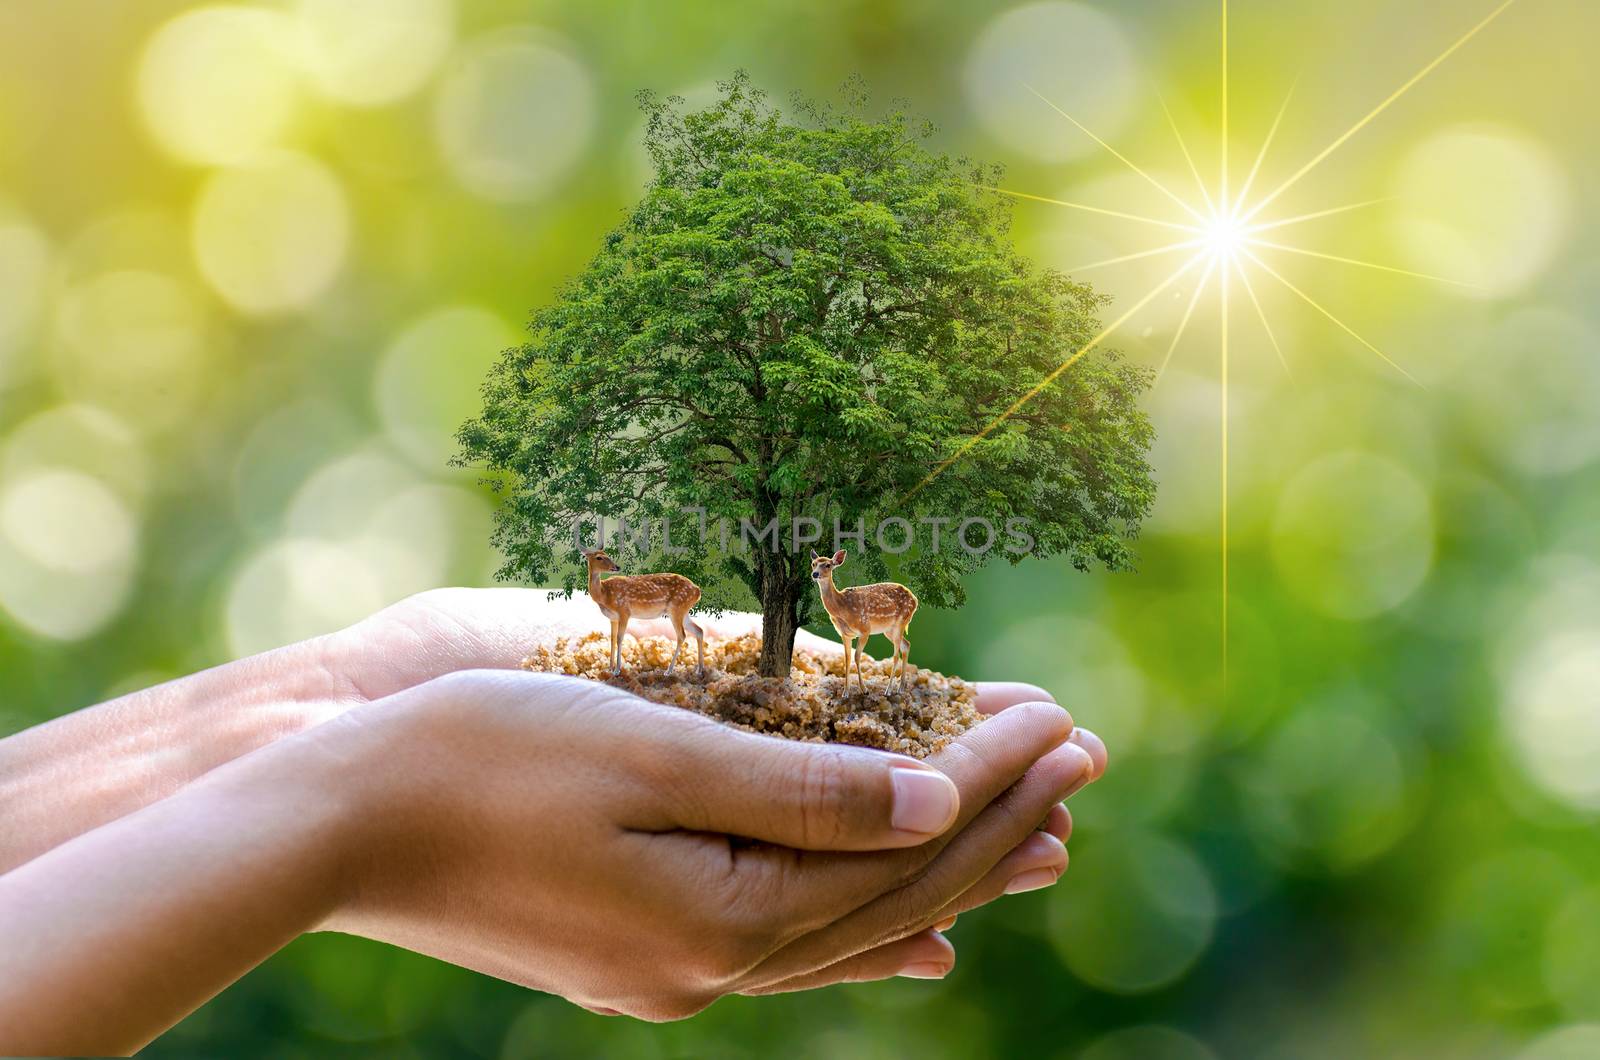 tree in the hands of trees growing seedlings. Bokeh green Background Female hand holding tree on nature field grass Forest conservation concept Two deer standing under a tree with sunlight.